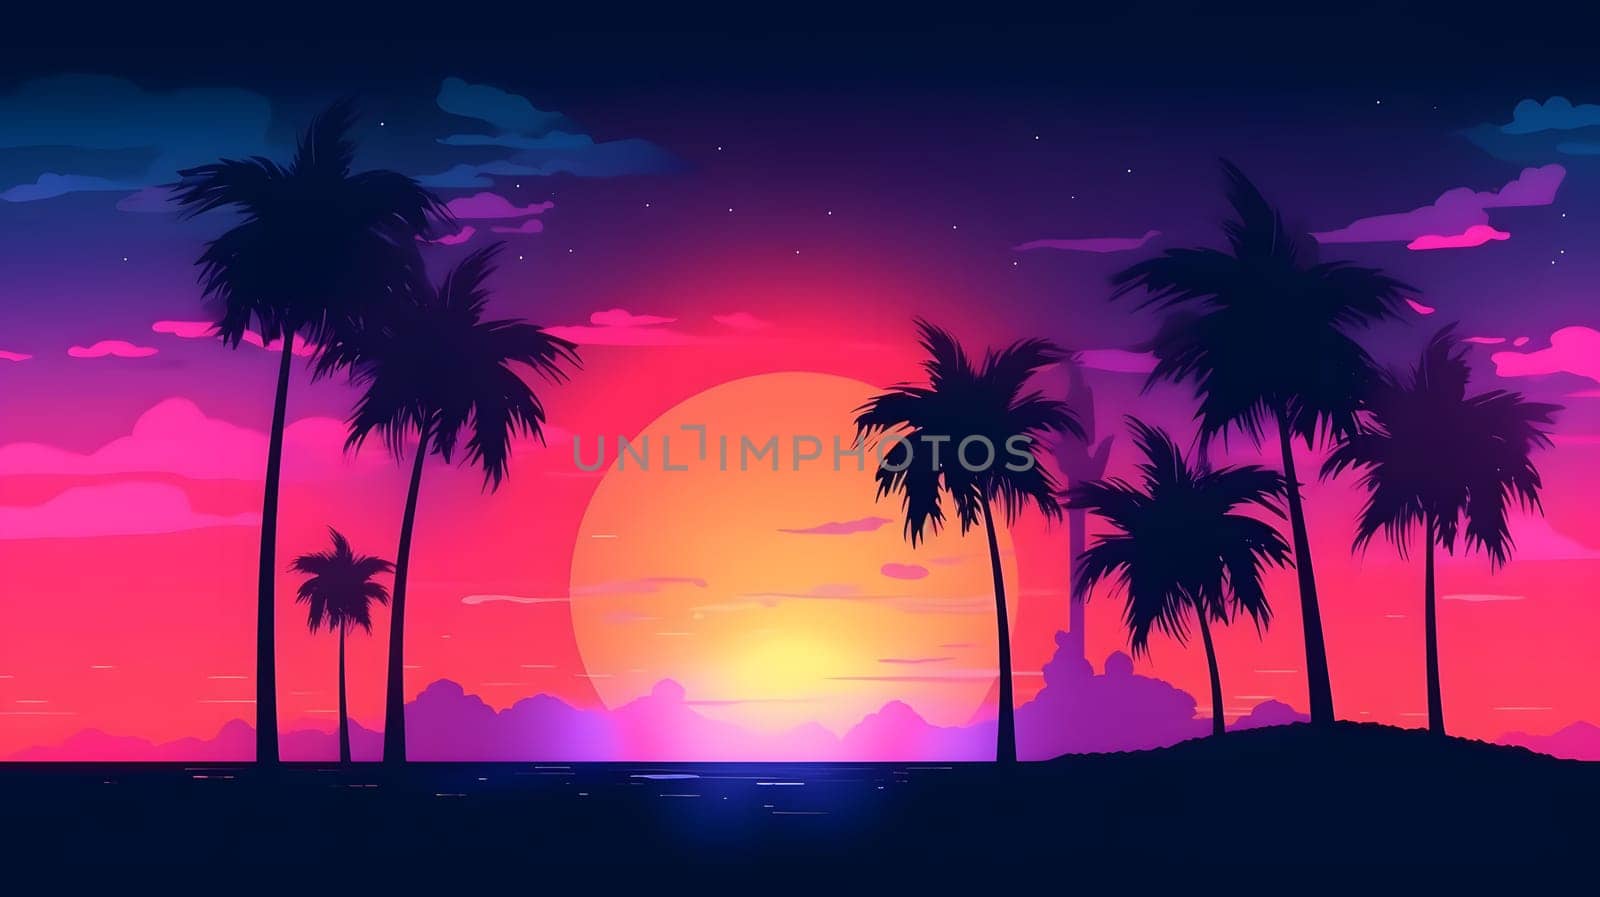 generic low-fi synthvawe gradient sunset landscape with palm trees silhouettes in neon colors. Neural network generated in May 2023. Not based on any actual person, scene or pattern.